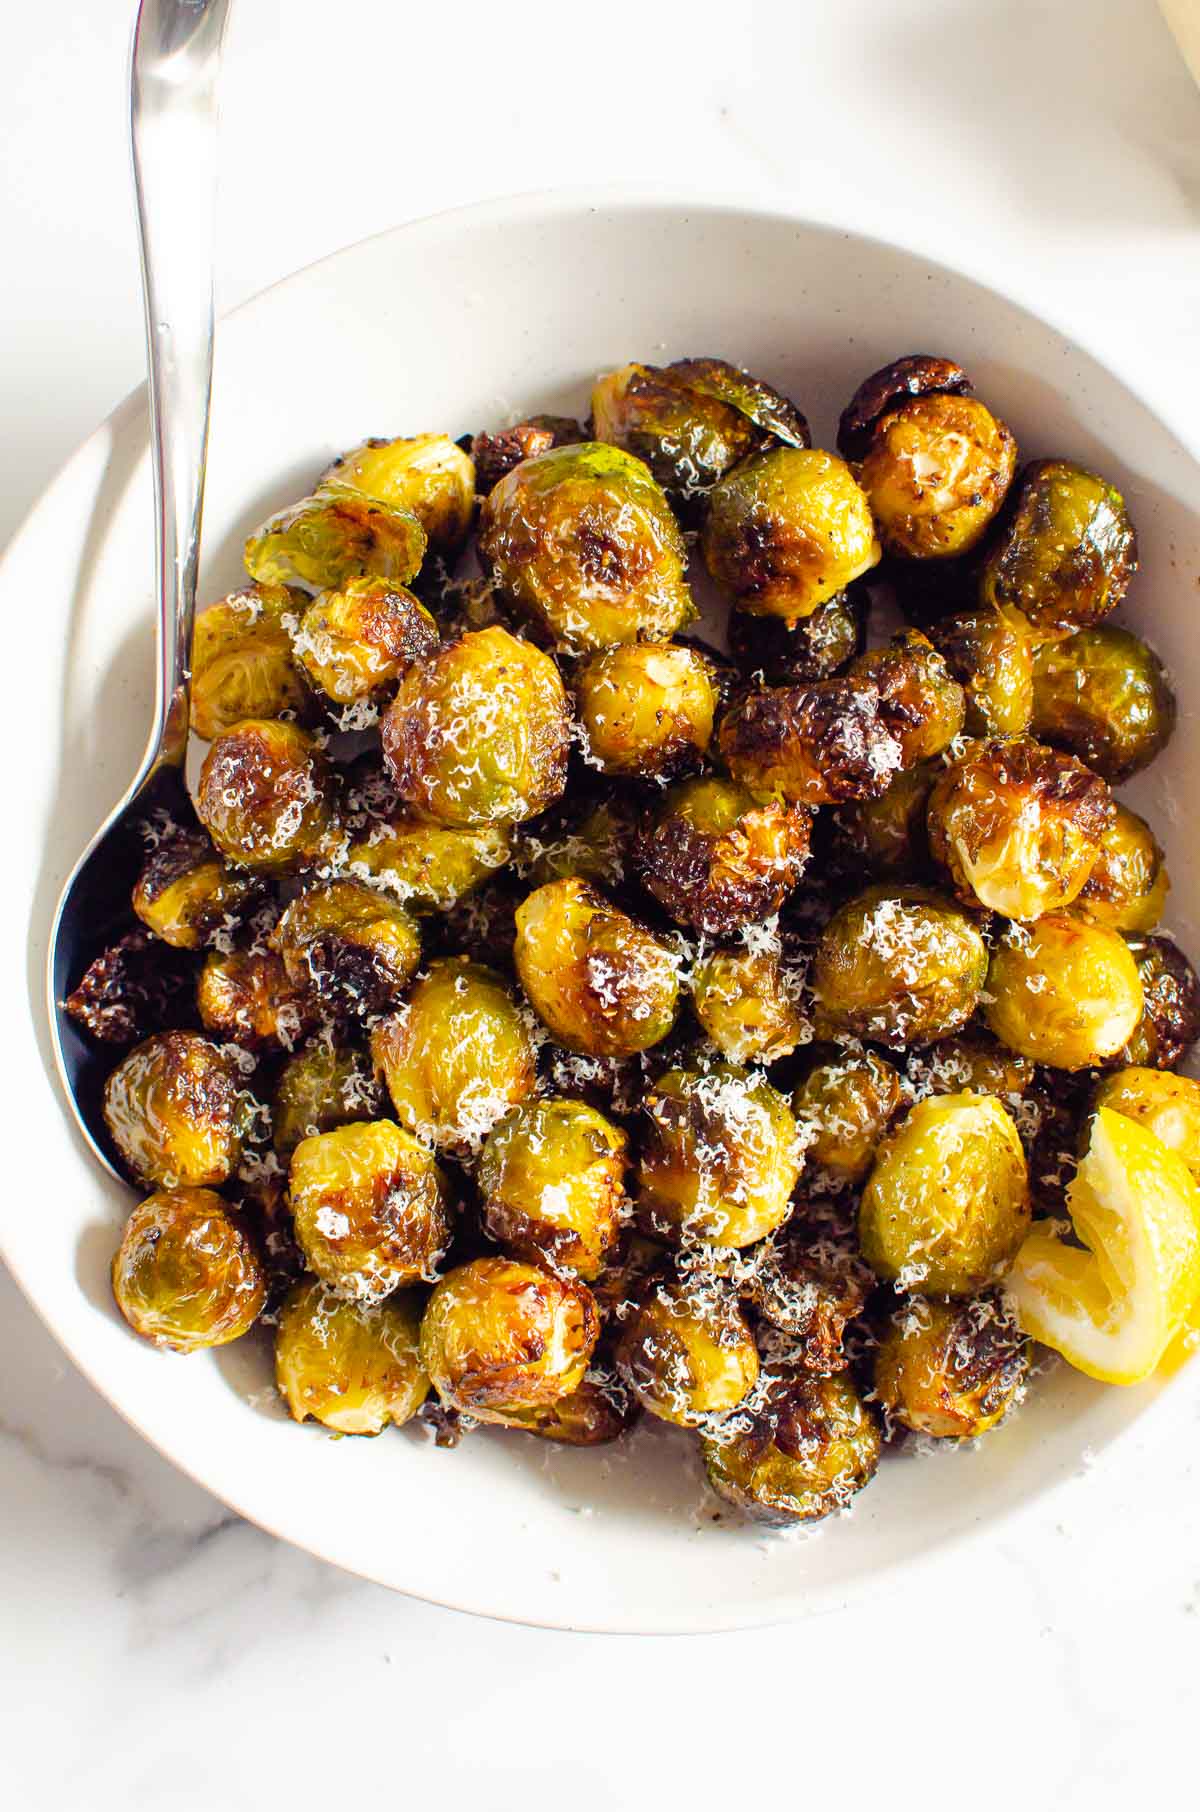 Parmesan roasted brussels sprouts in a serving bowl with spoon.